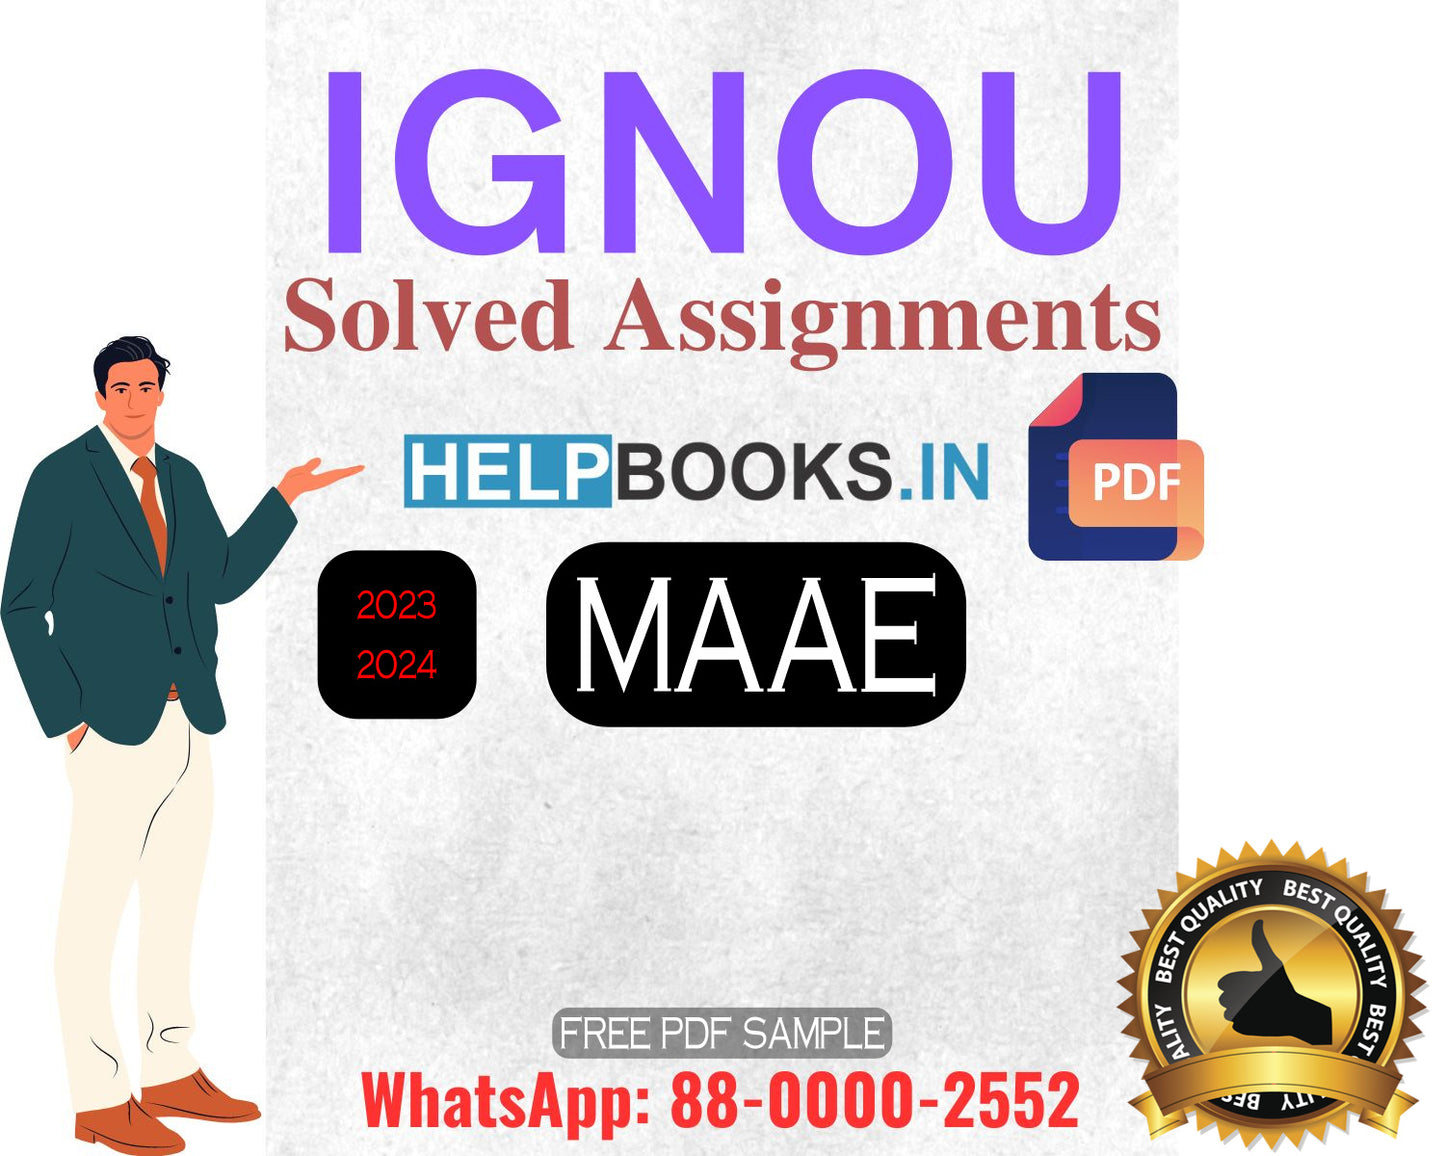 IGNOU Master's Degree Programme Latest IGNOU Solved Assignment 2023-24 & 2022-23 Sessions : MAAE Master of Arts Adult Education Solved Assignments